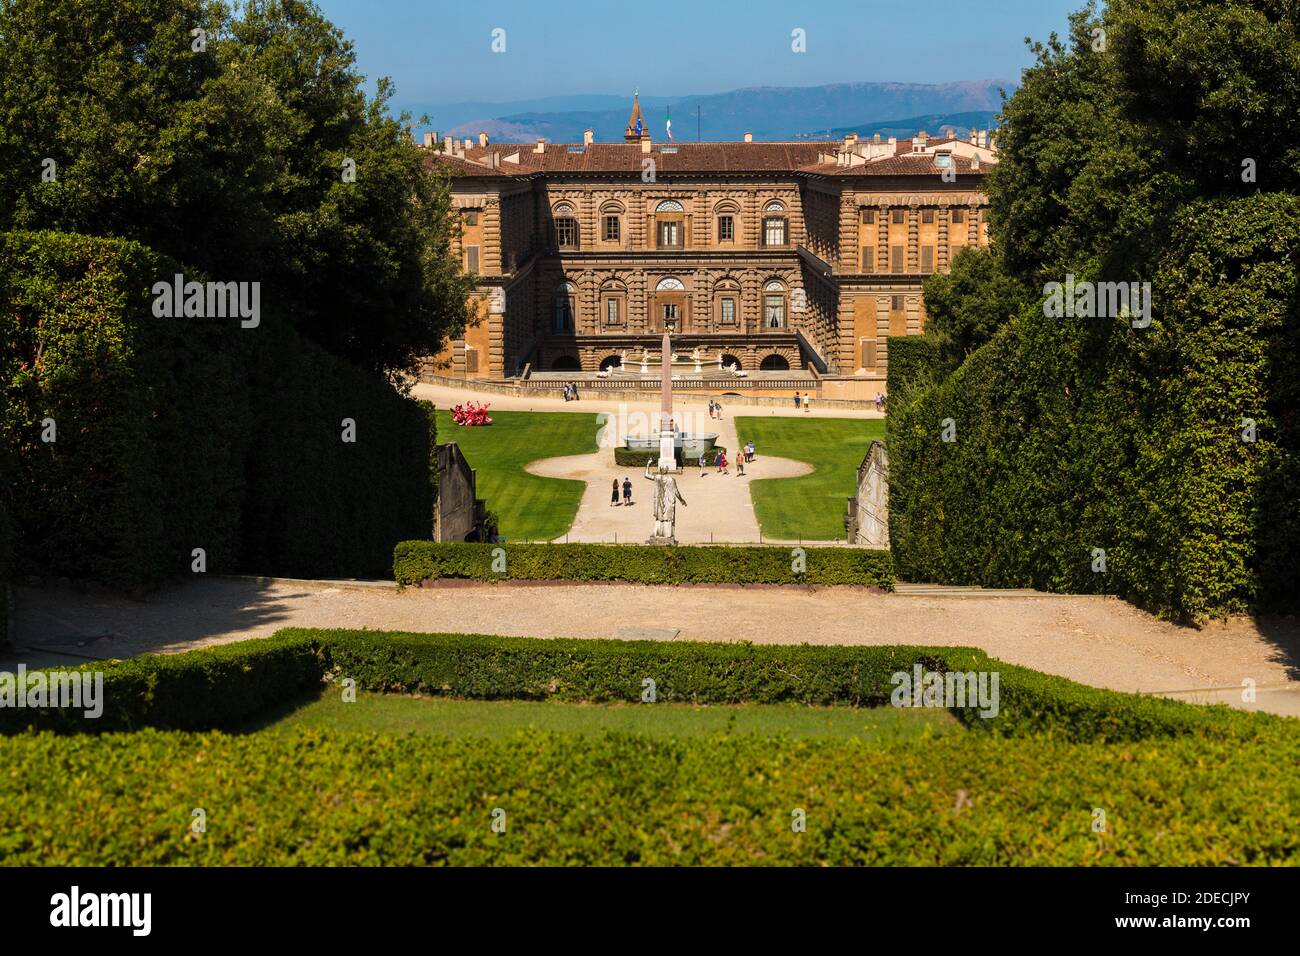 Gorgeous view of the Palazzo Pitti and the ancient Egyptian red granite obelisk and granite basin taken from the Fountain of Neptune between the... Stock Photo